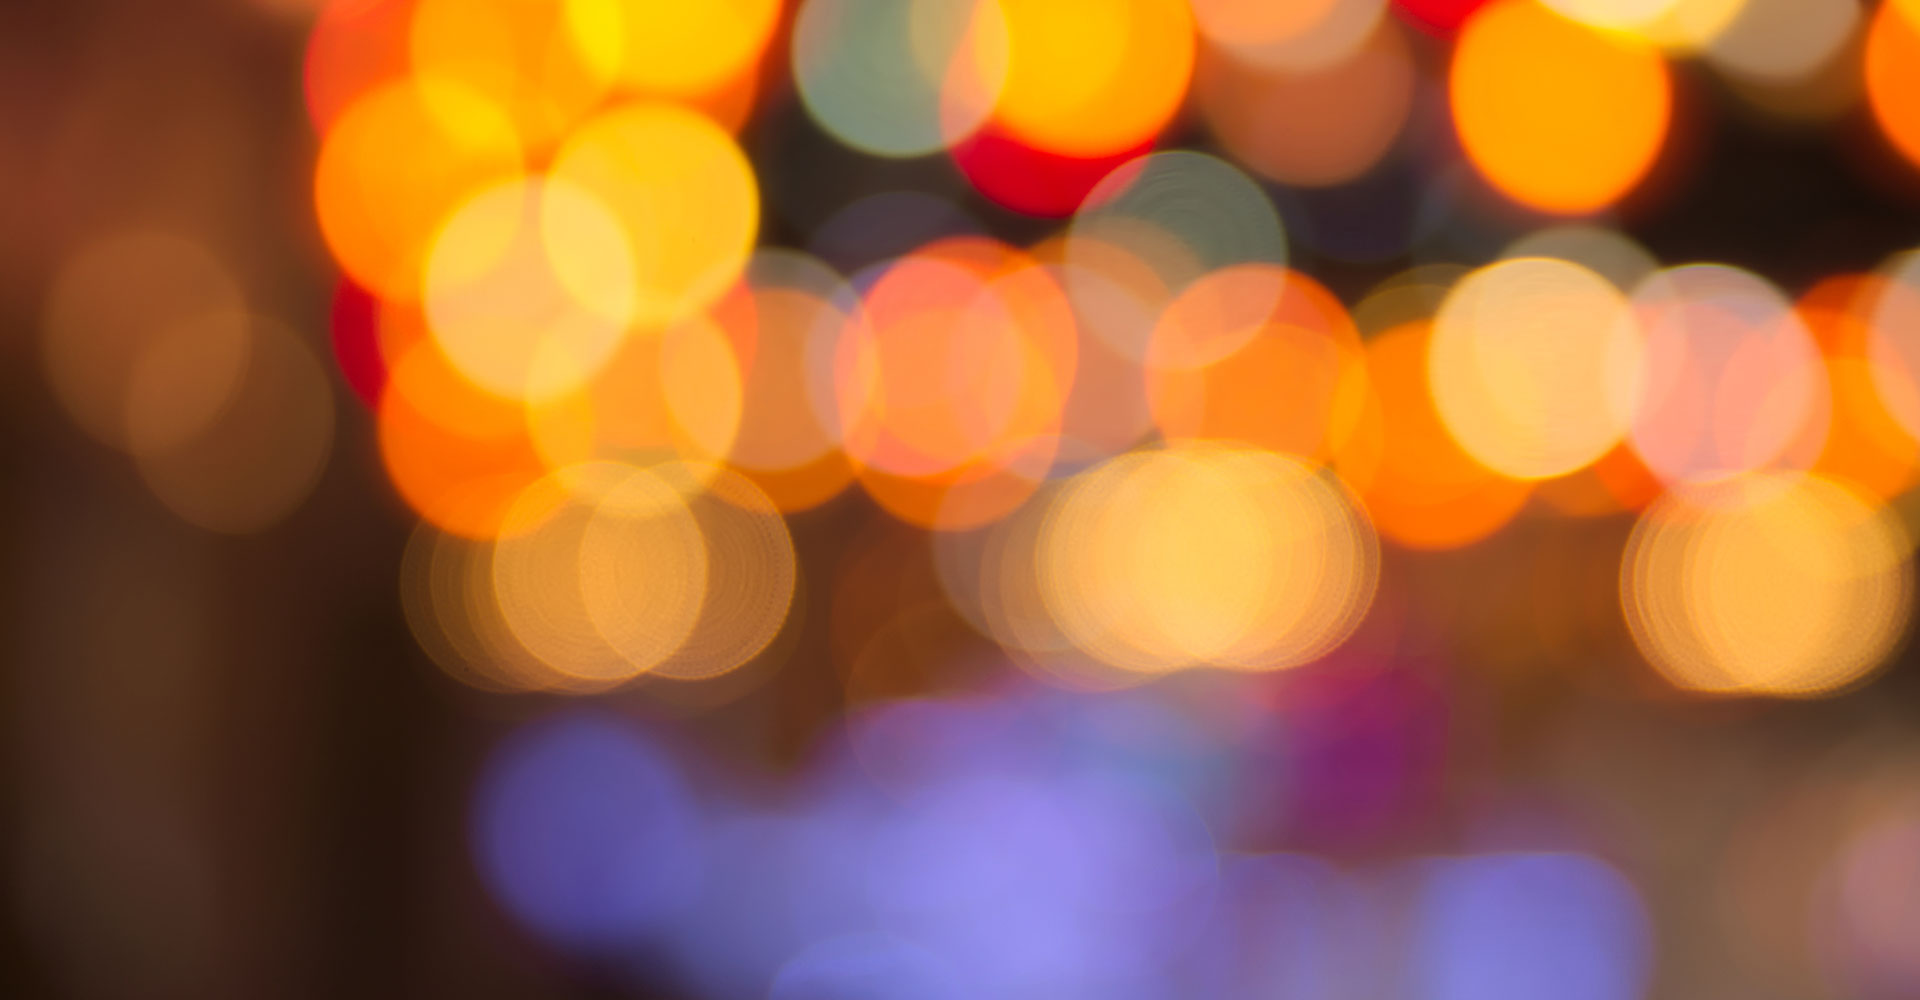 Photo of lights blurred in yellows, oranges, and blues.